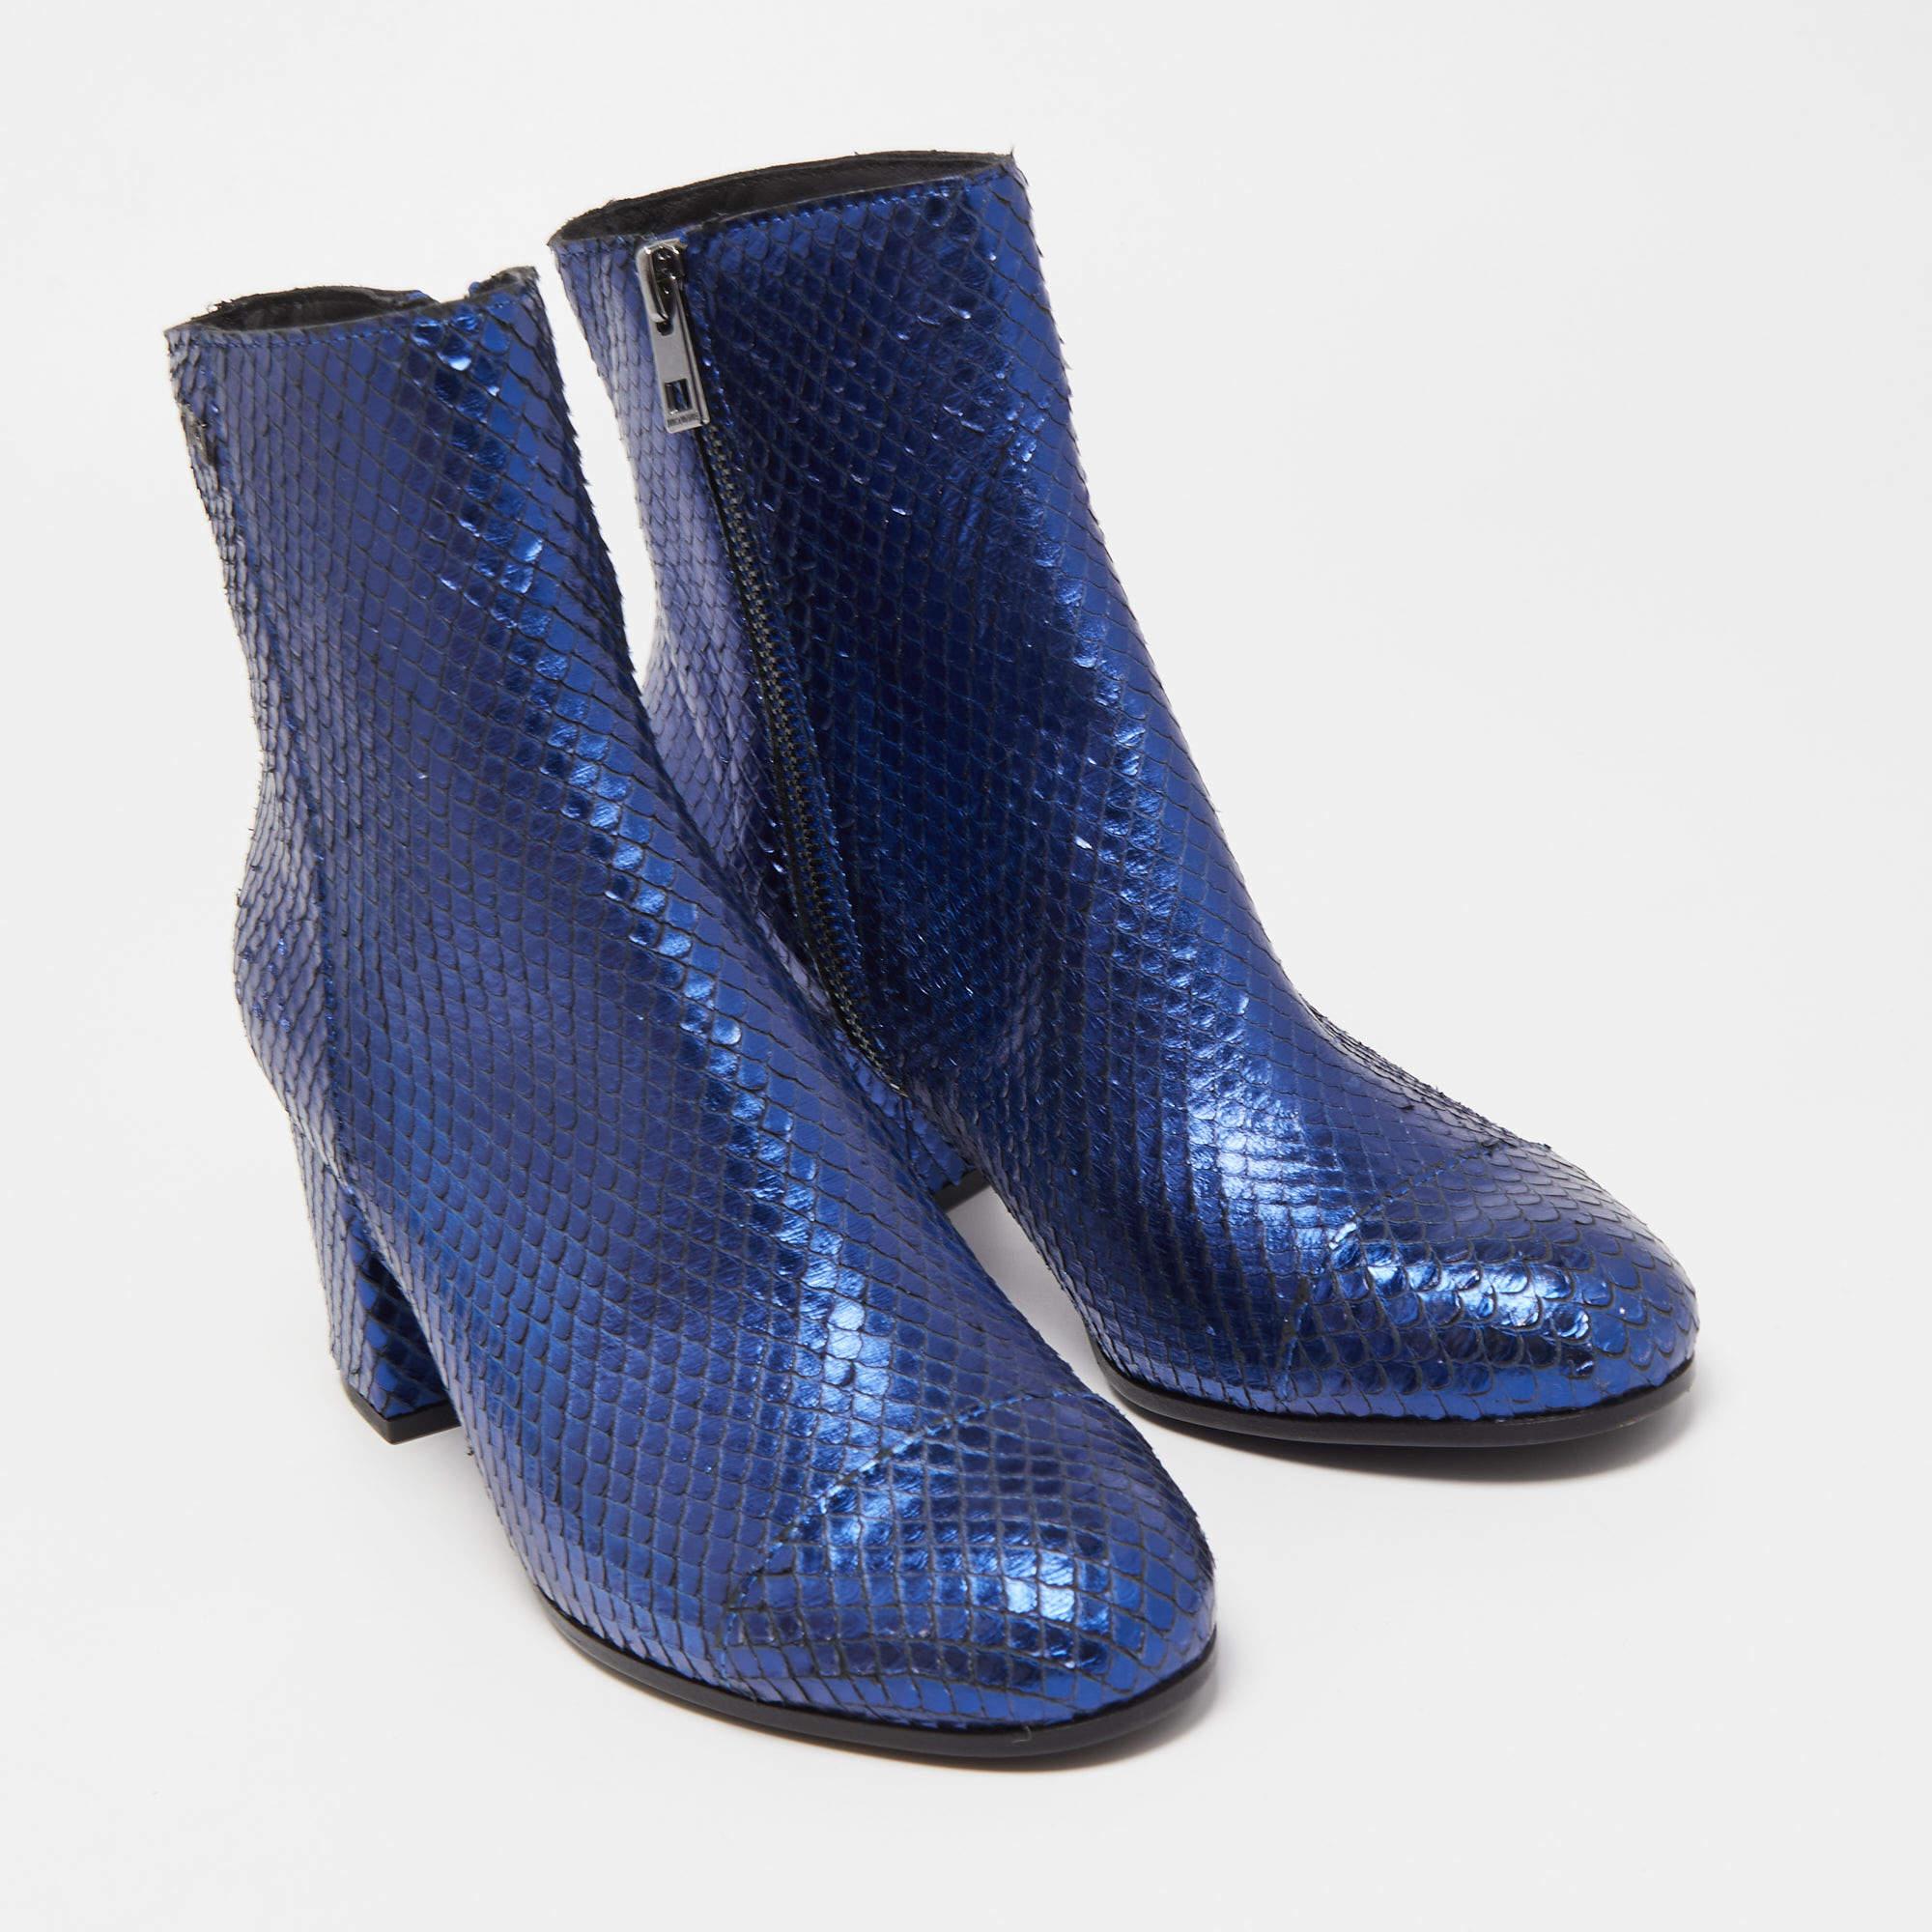 Zadig & Voltaire Blue Python Embossed Leather Block Heel Ankle Booties Size 36 In Excellent Condition For Sale In Dubai, Al Qouz 2